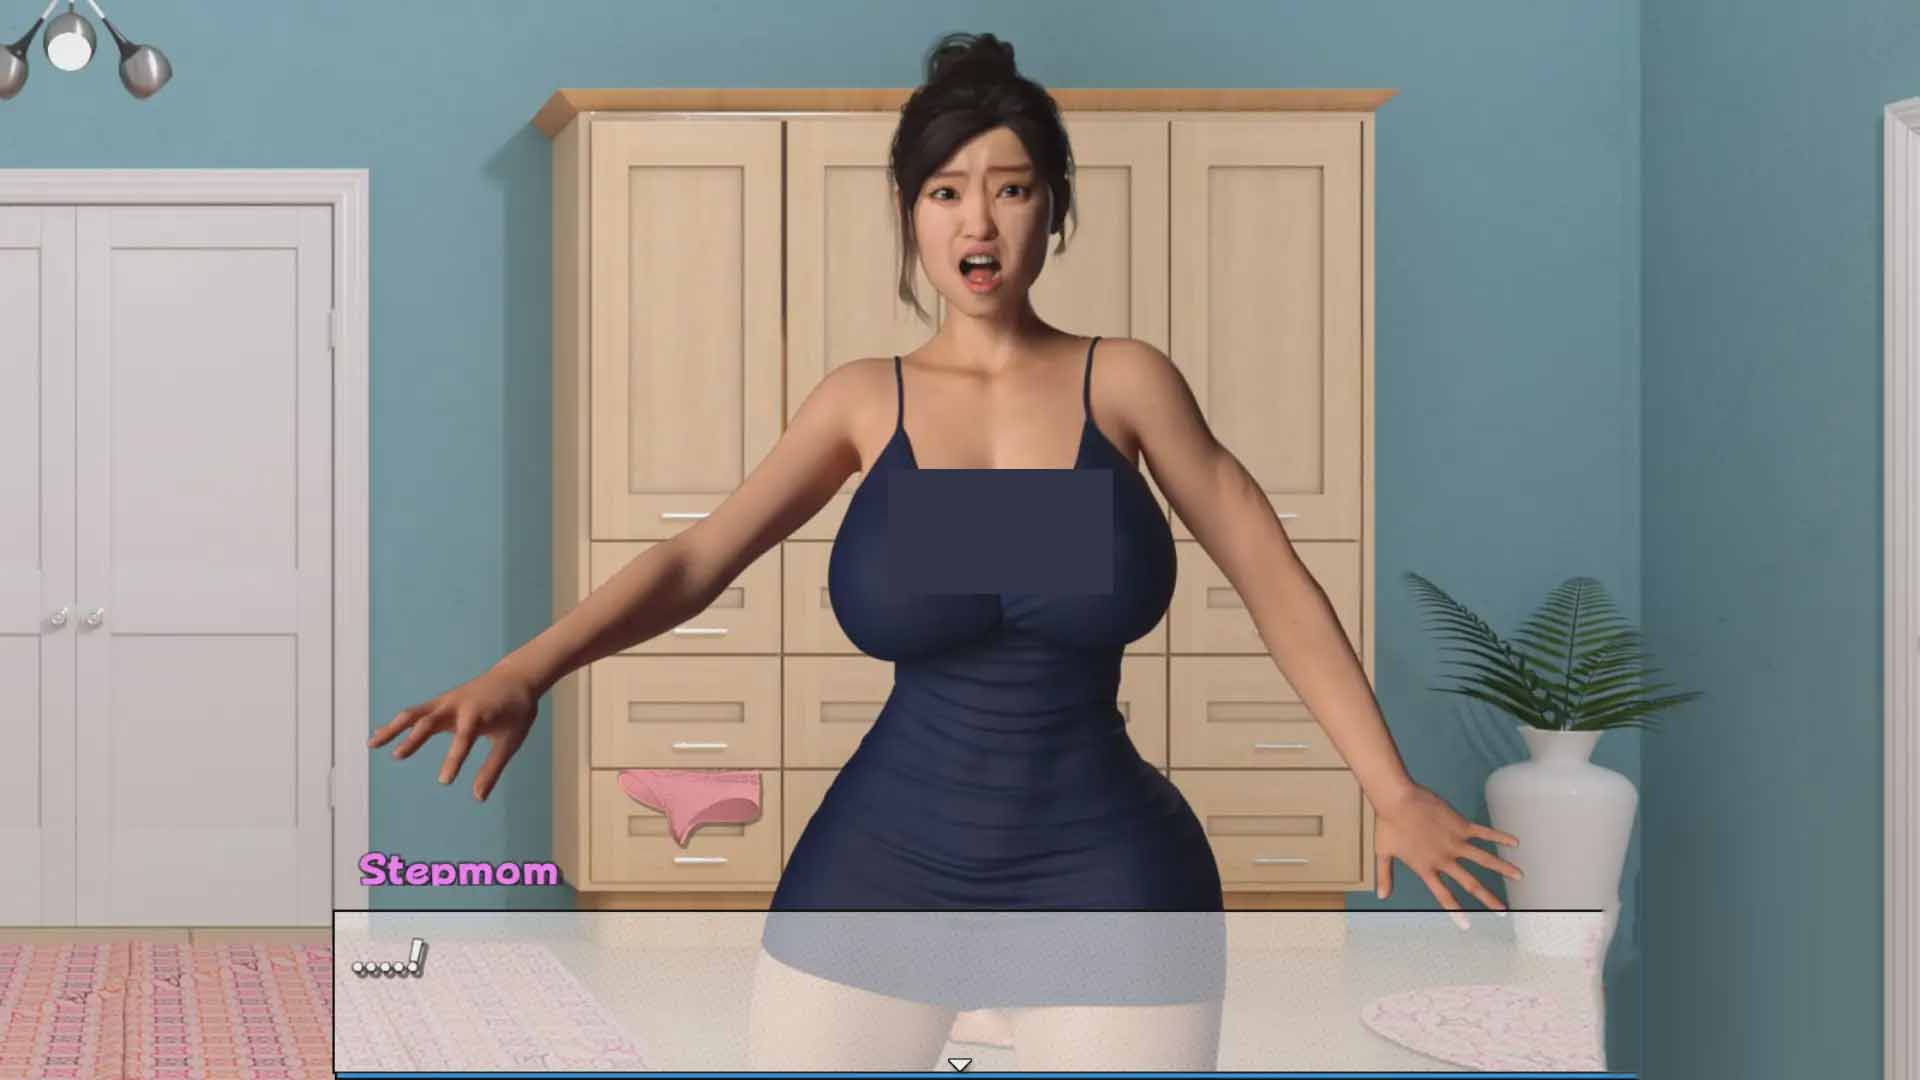 [RPGPC汉化] 如何征服你的继母 How to Conquer Your Stepmother [300M]